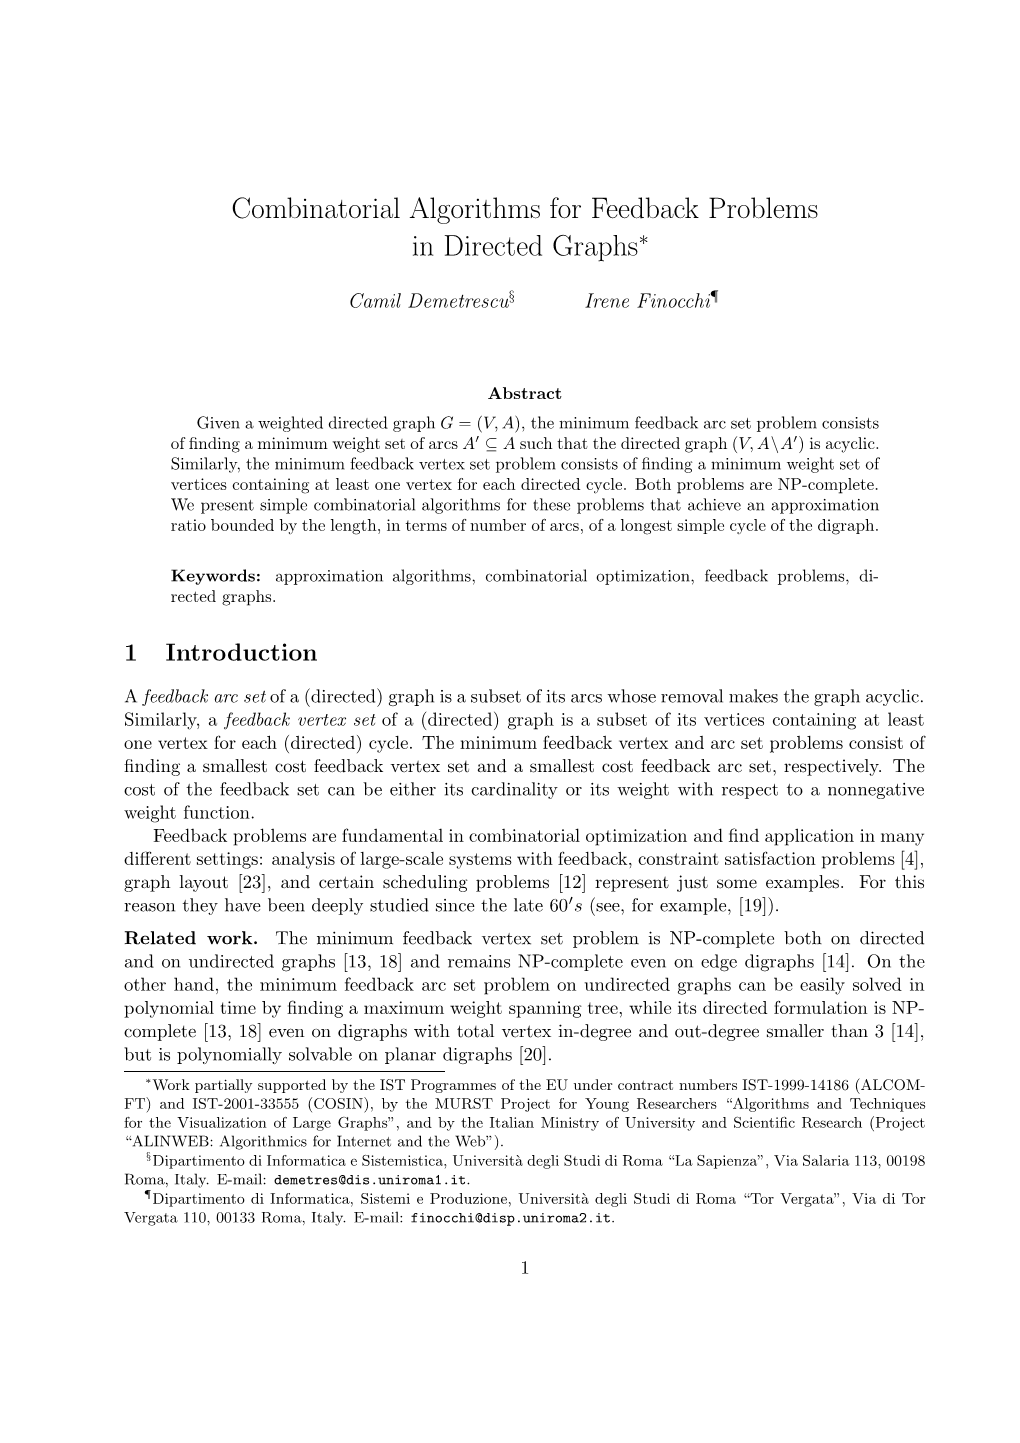 Combinatorial Algorithms for Feedback Problems in Directed Graphs∗